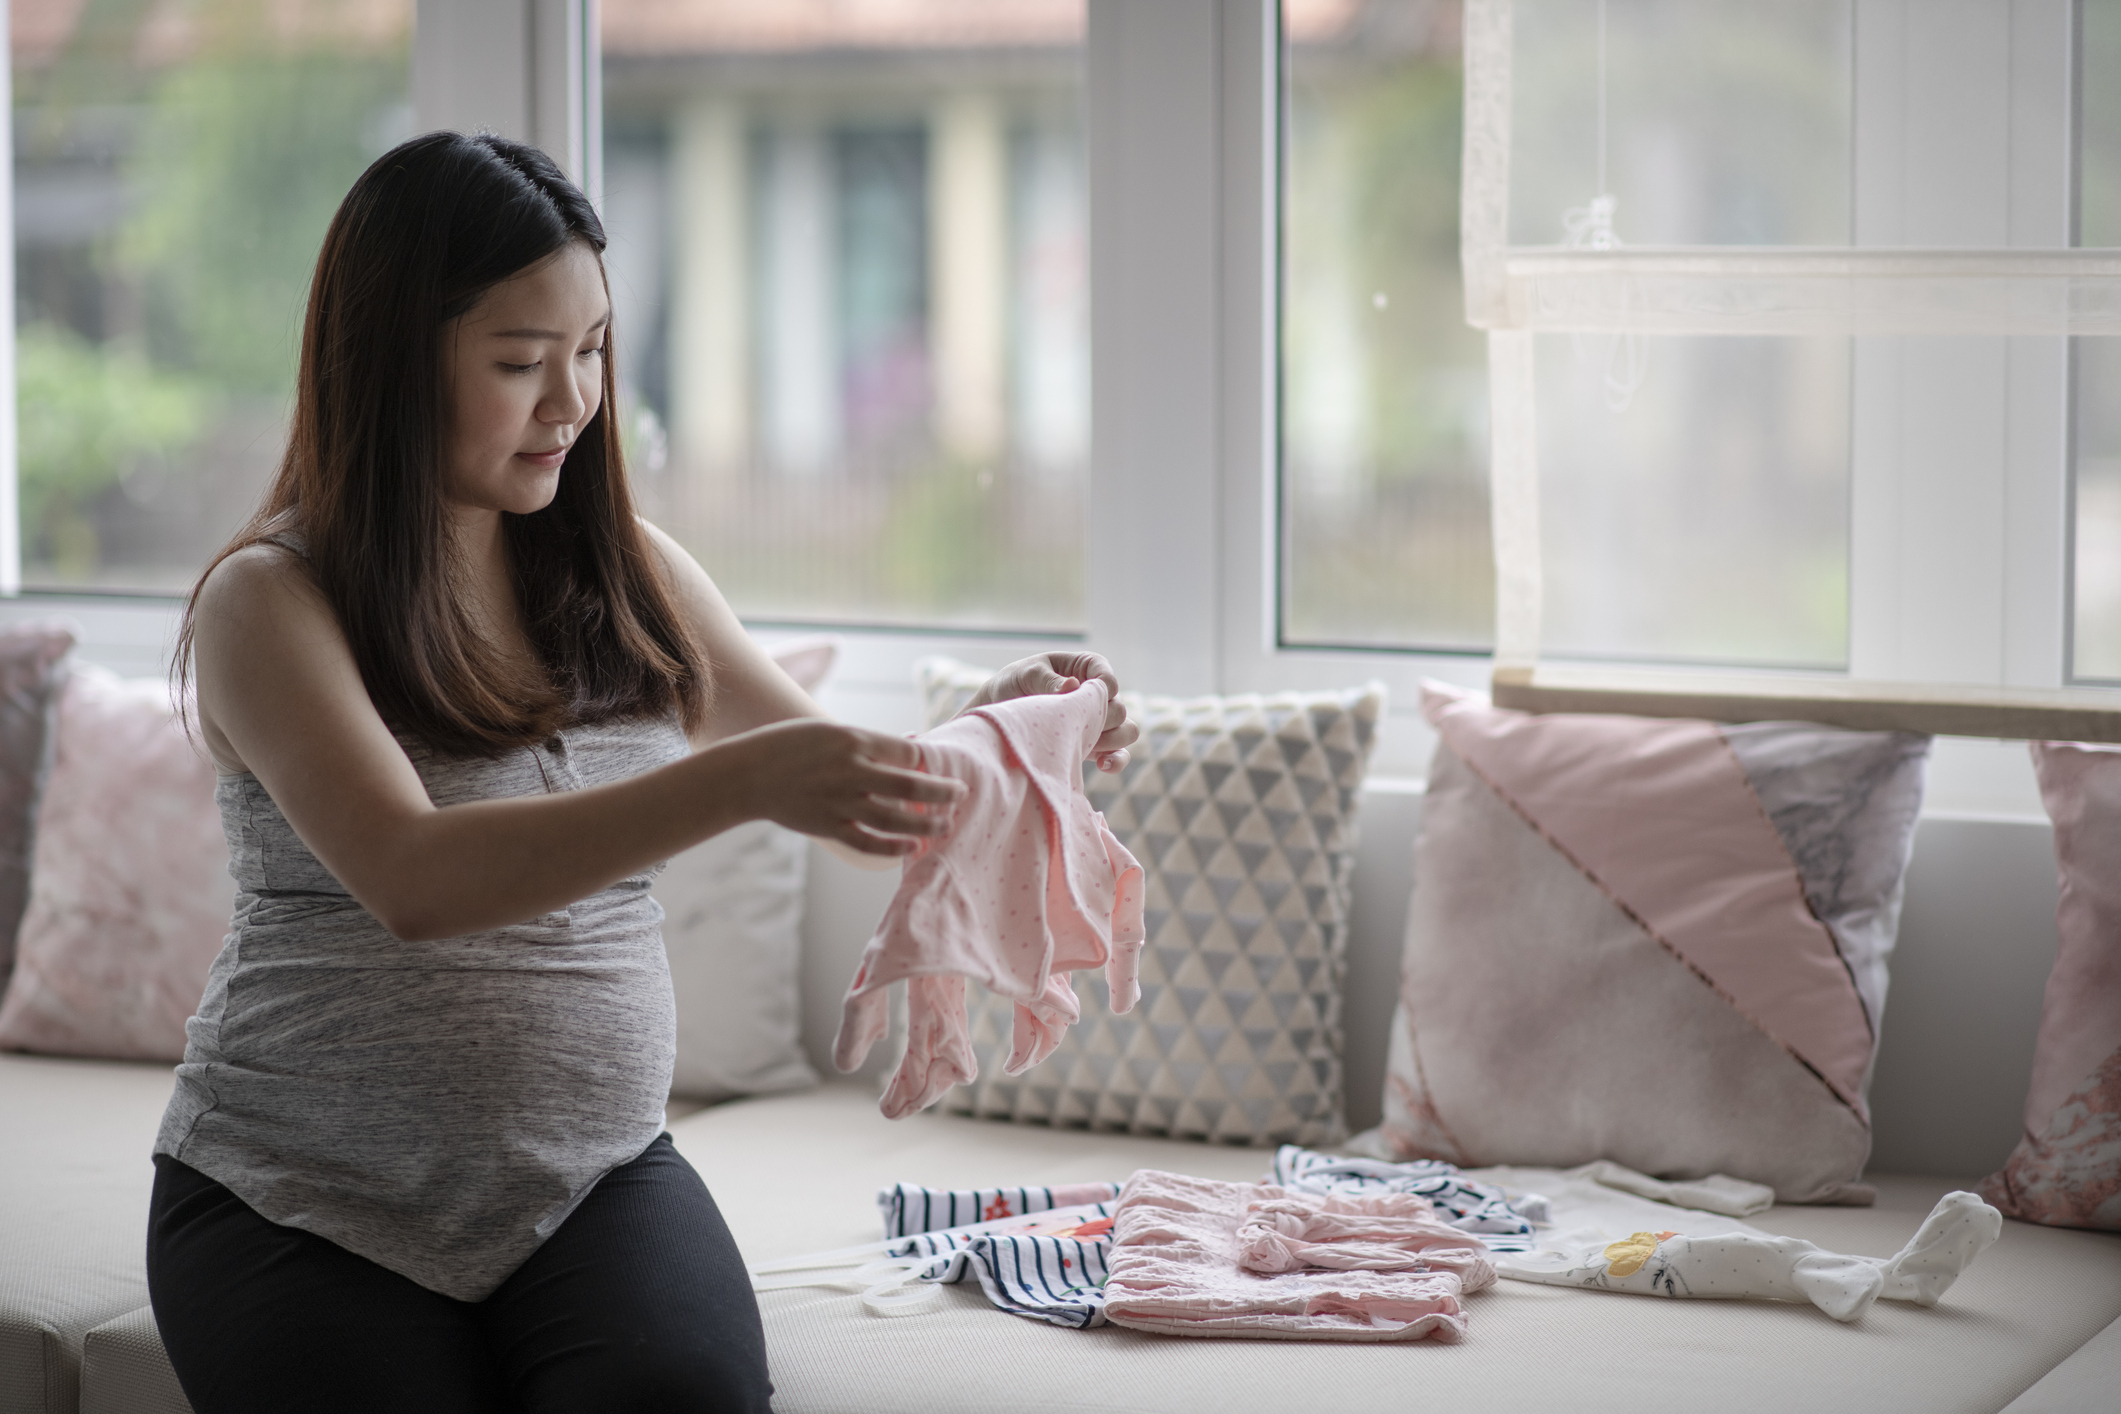 Pregnant woman prepares a nursery by folding baby clothes